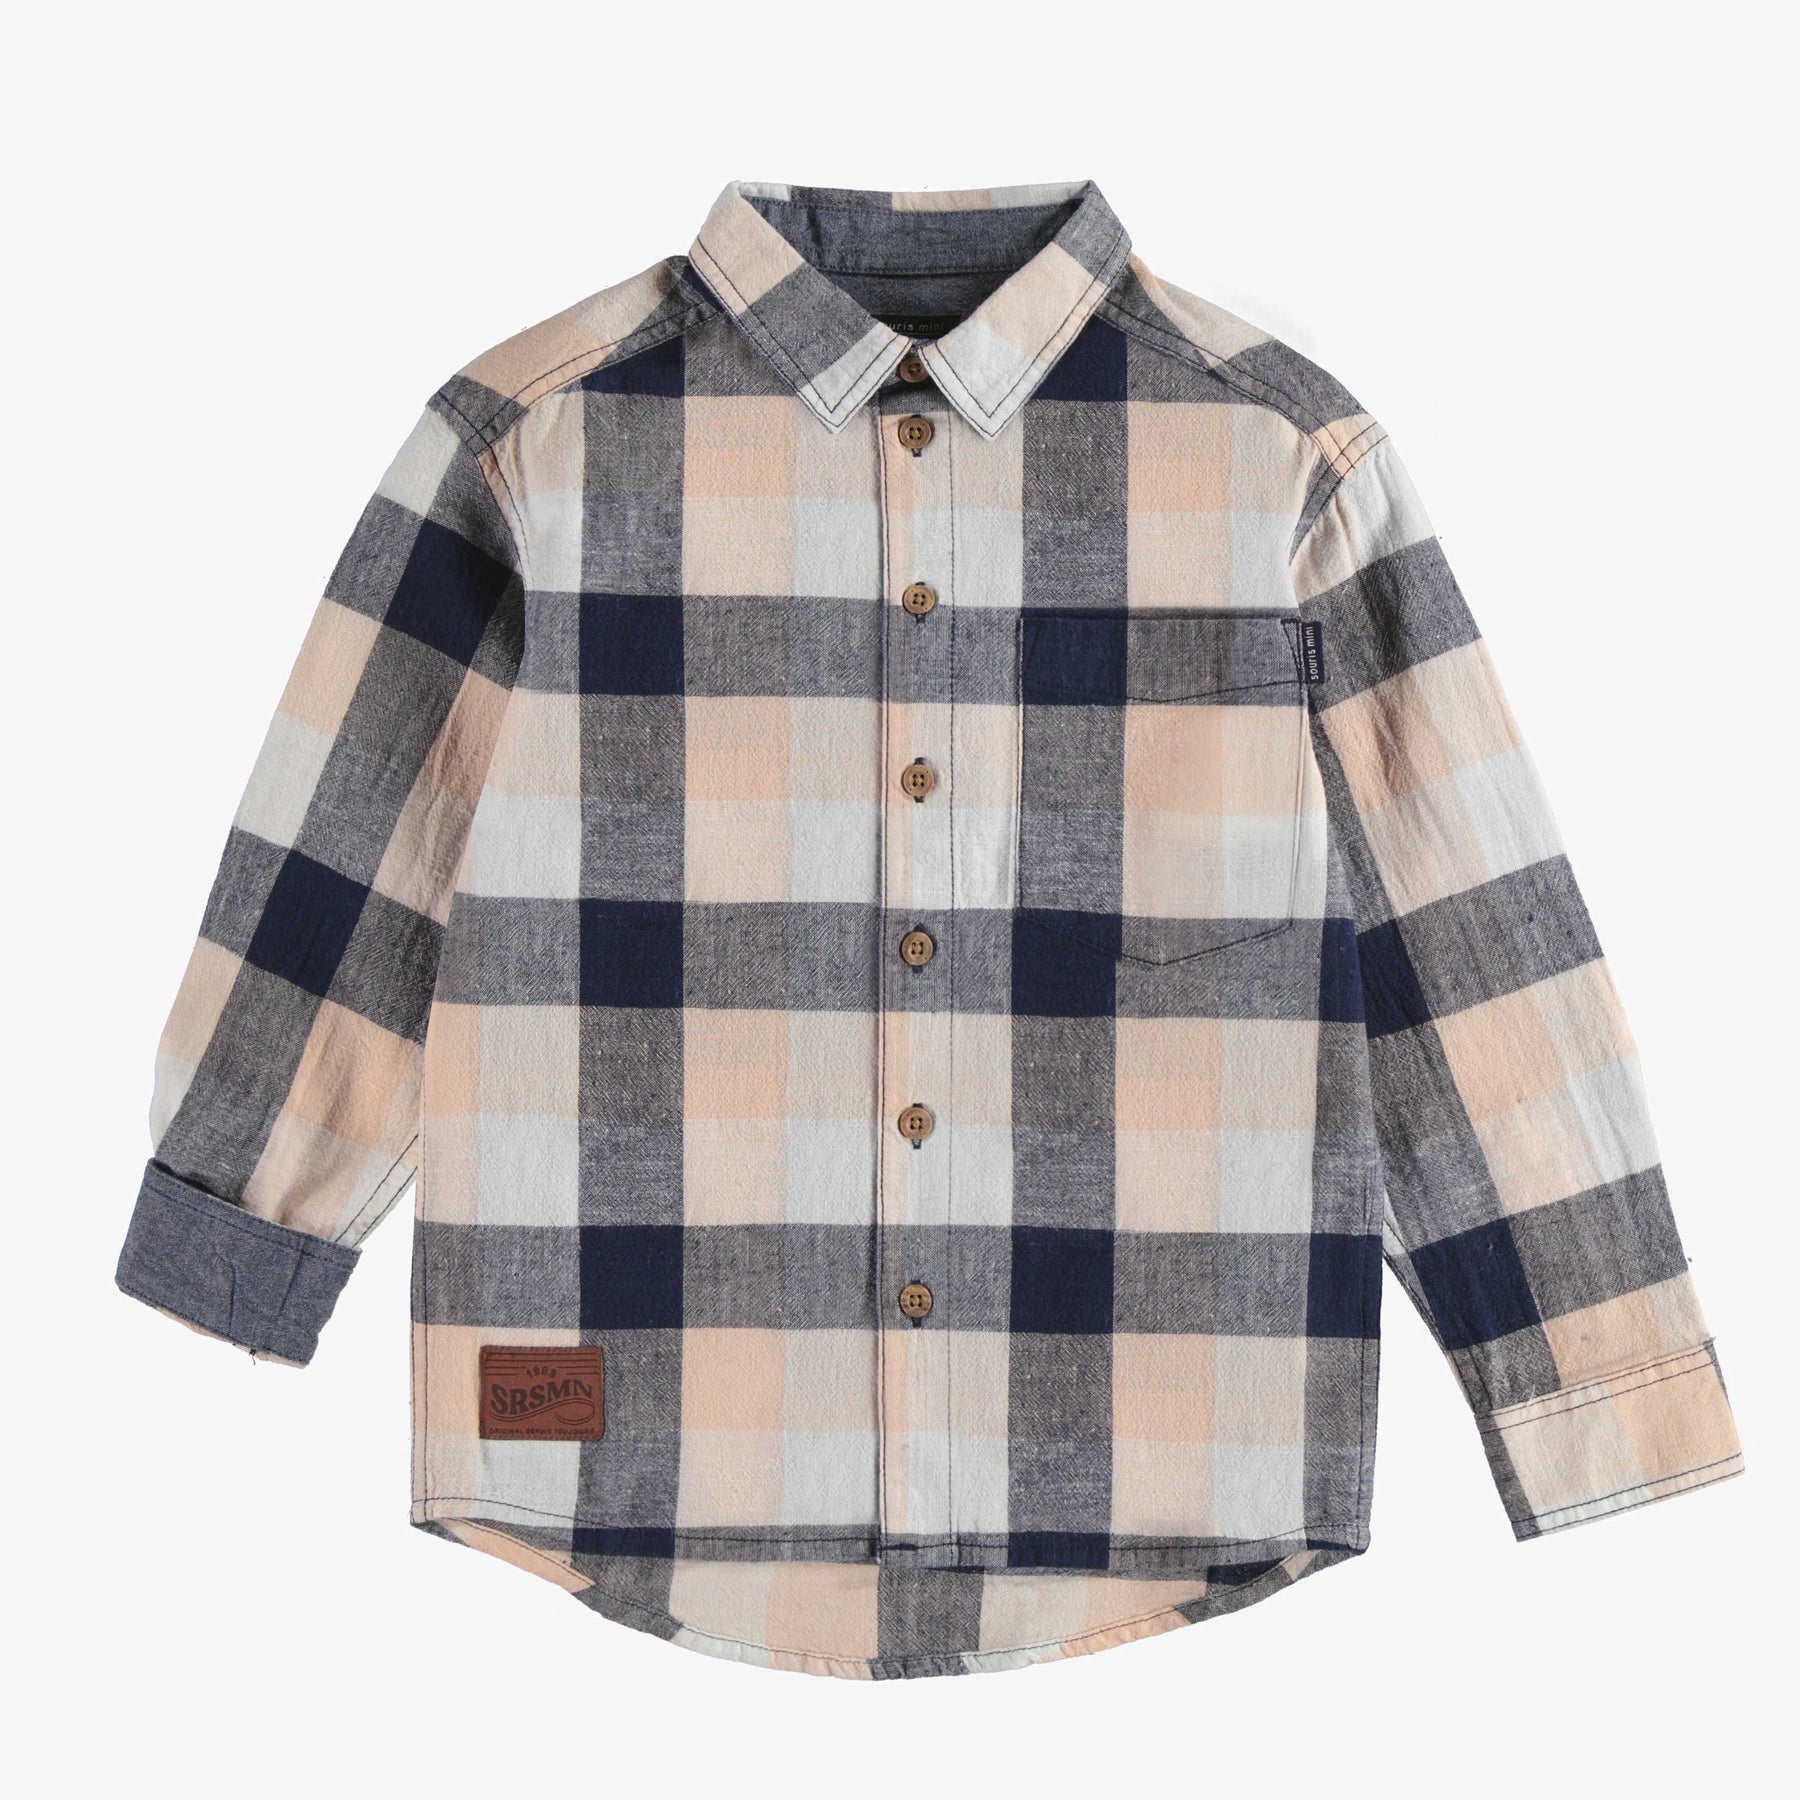 ORANGE AND NAVY PLAID LONG SLEEVES SHIRT LINEN COTTON, CHILD